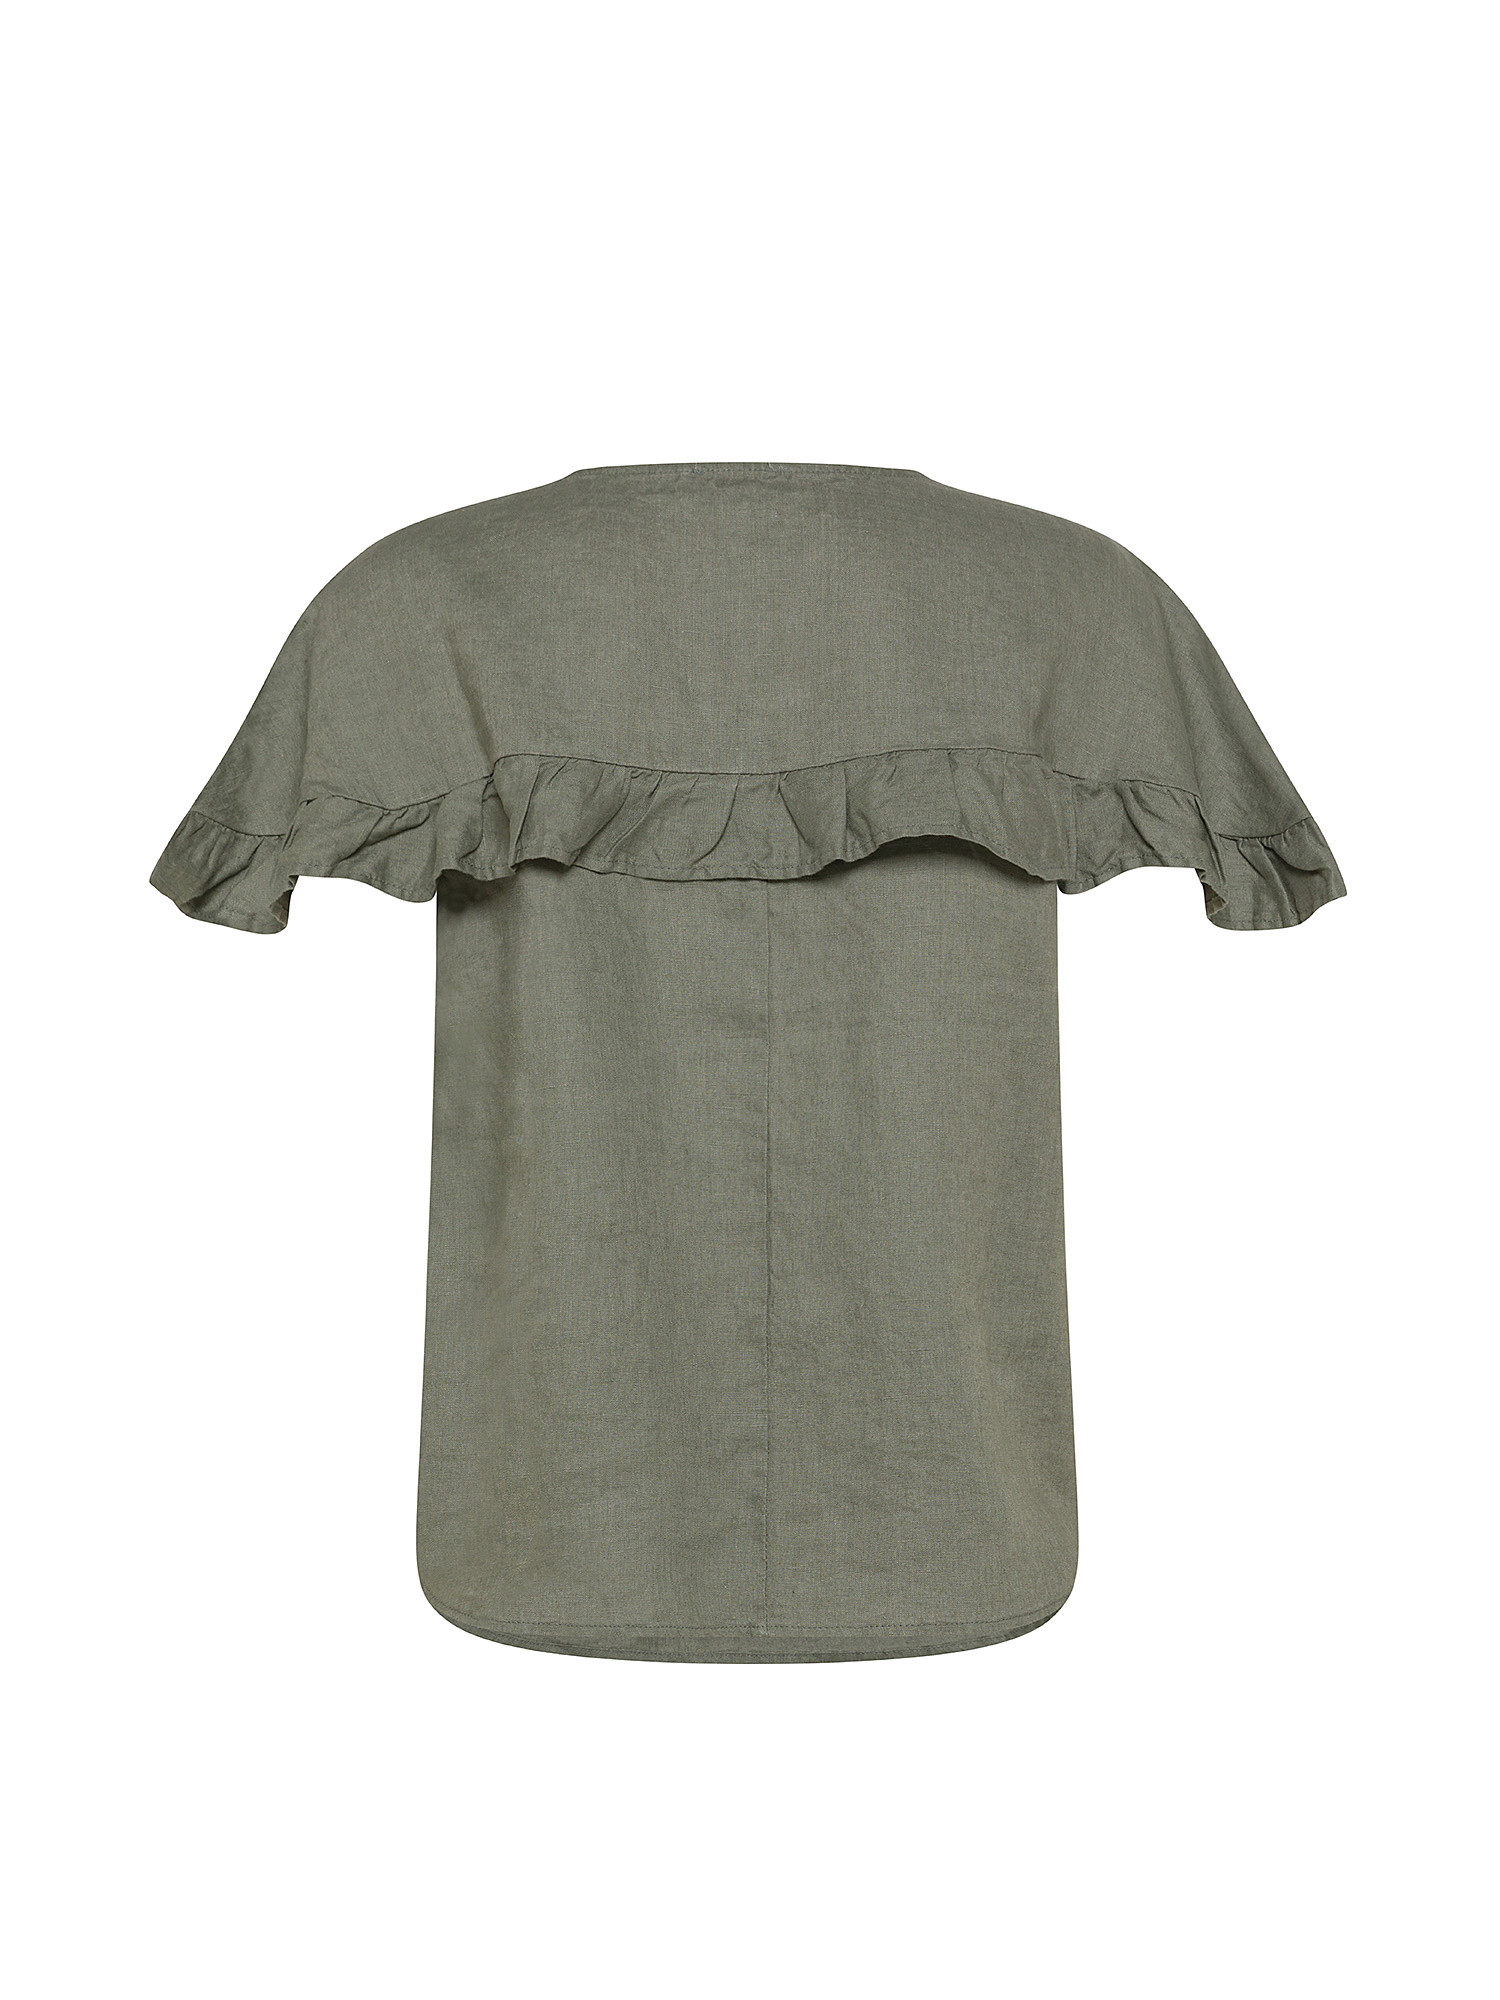 Koan - Linen blouse with ruffles, Sage Green, large image number 1